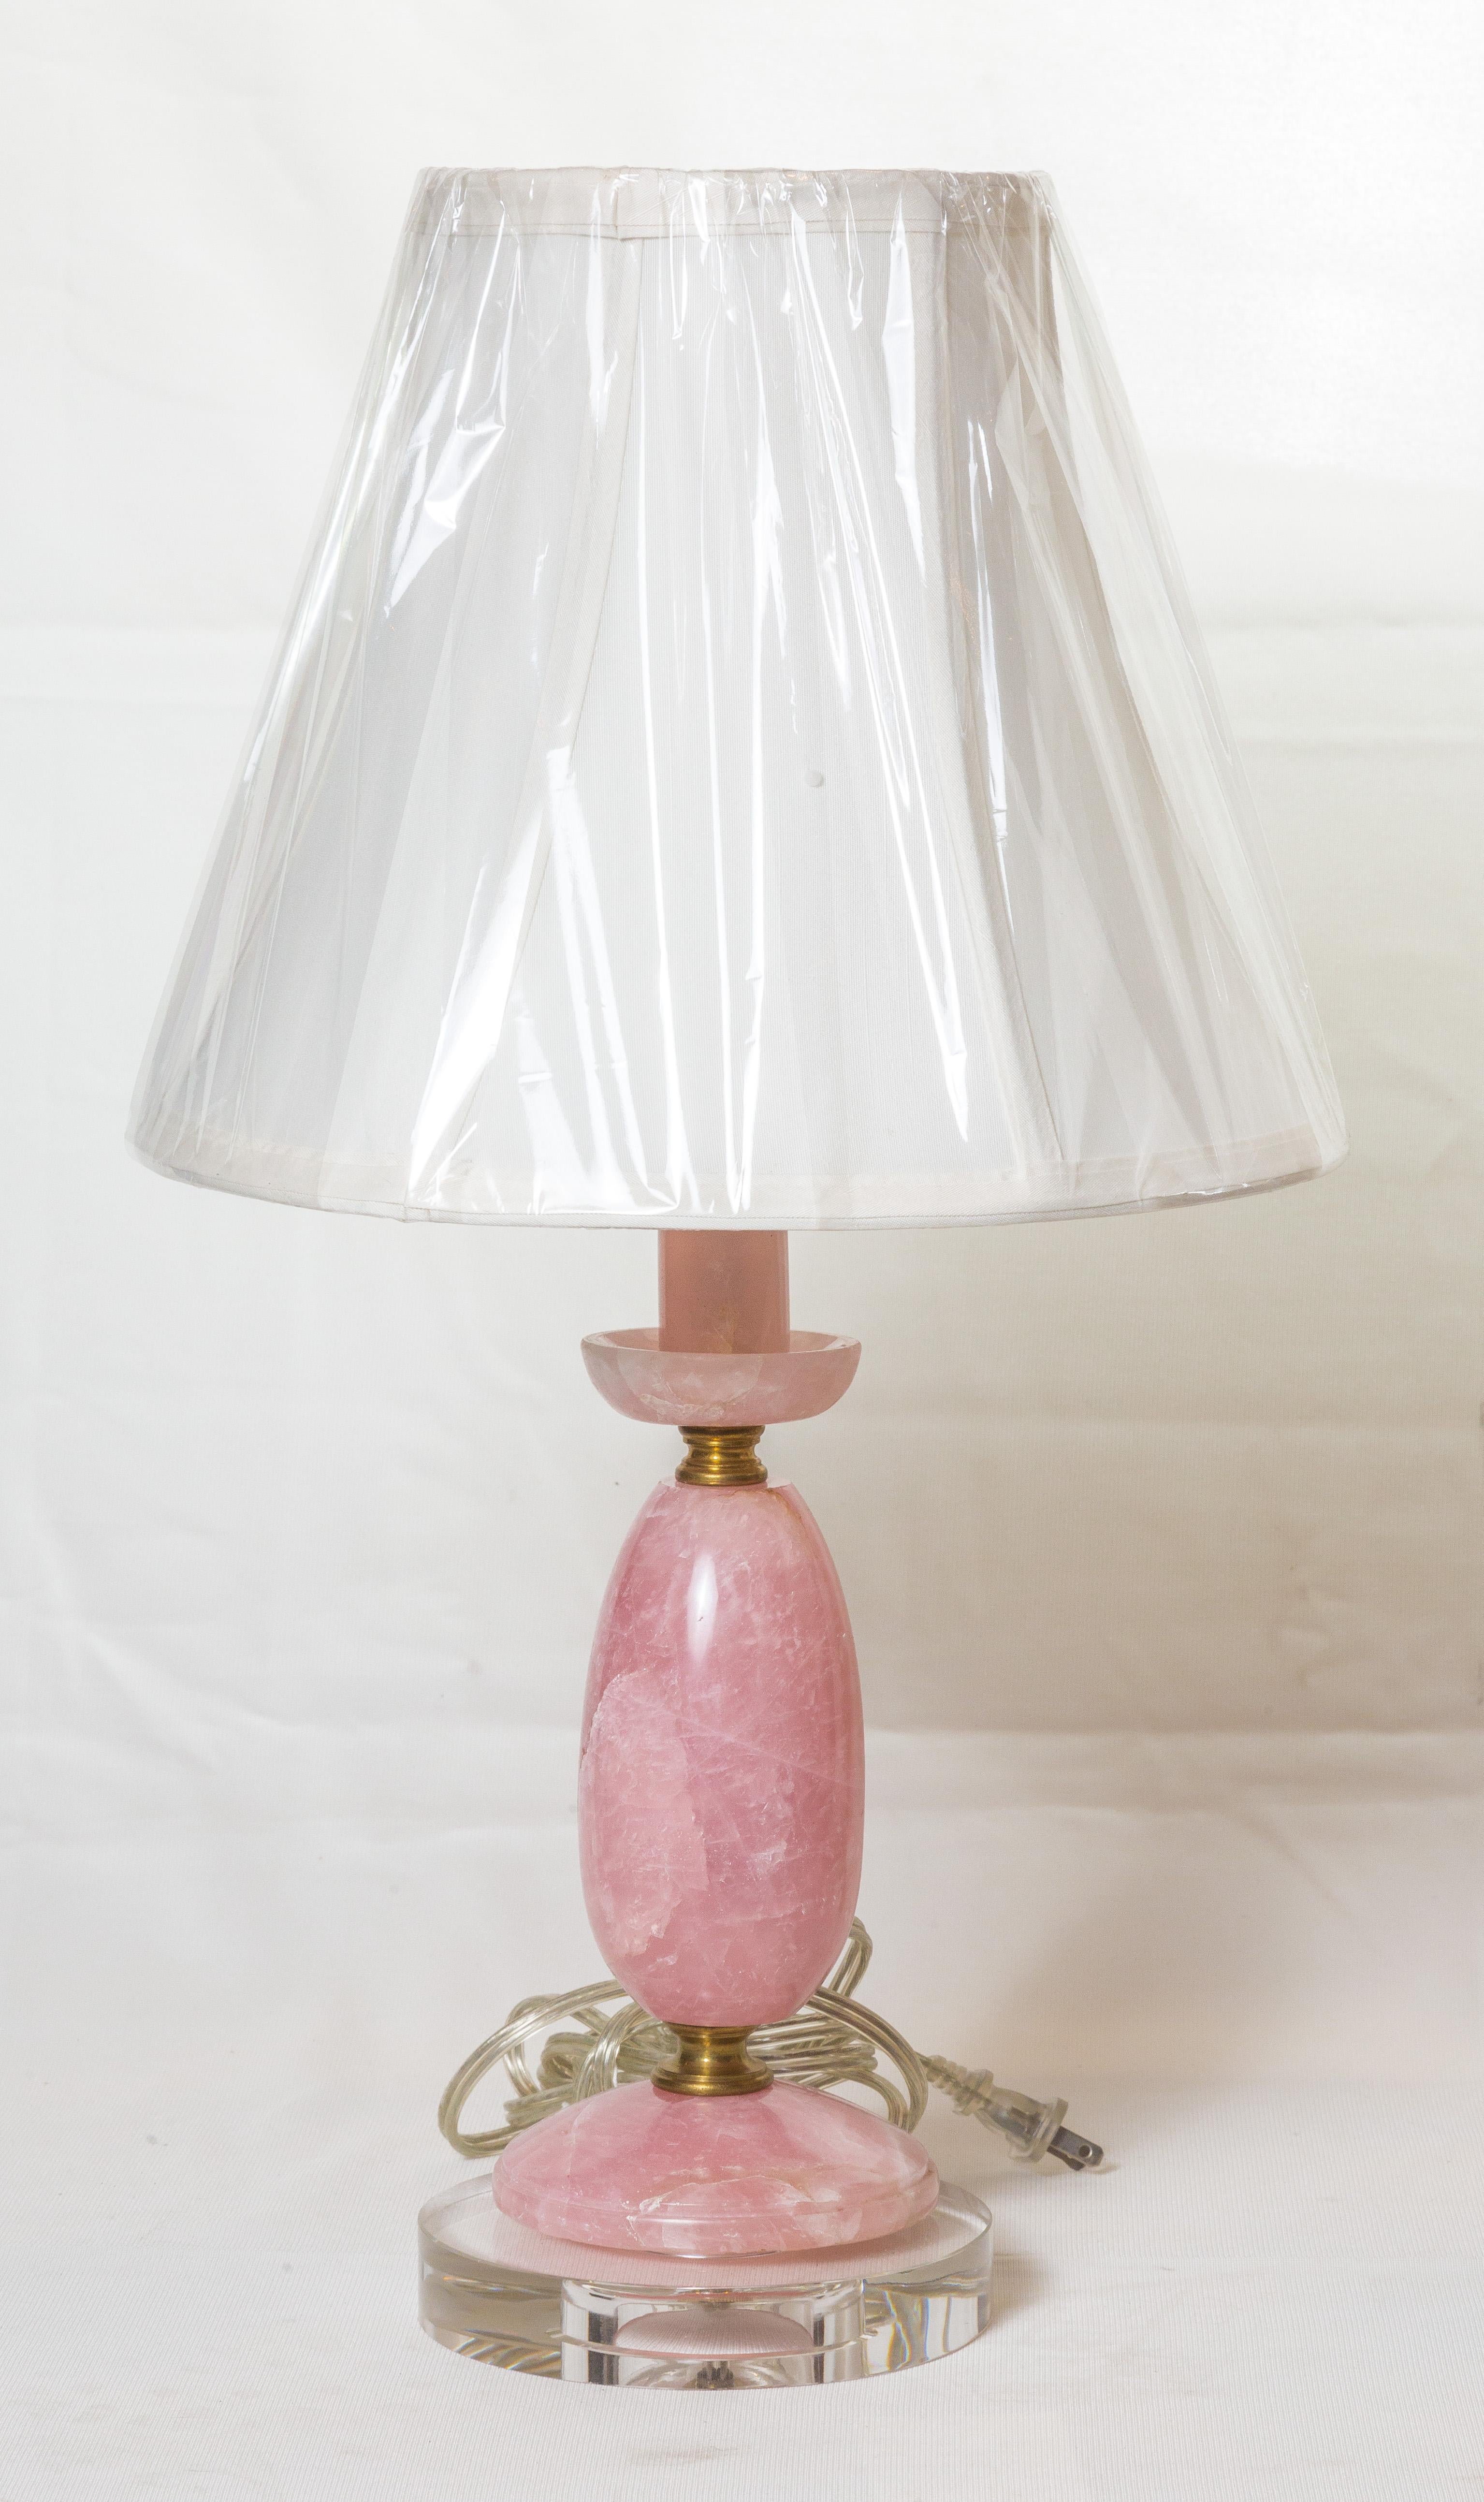 Unique pair of pink rock crystal lamps, handmade from Brazil, One light on ea. lamp.
American wire, in excellent conditions. The lamp sits in a 6